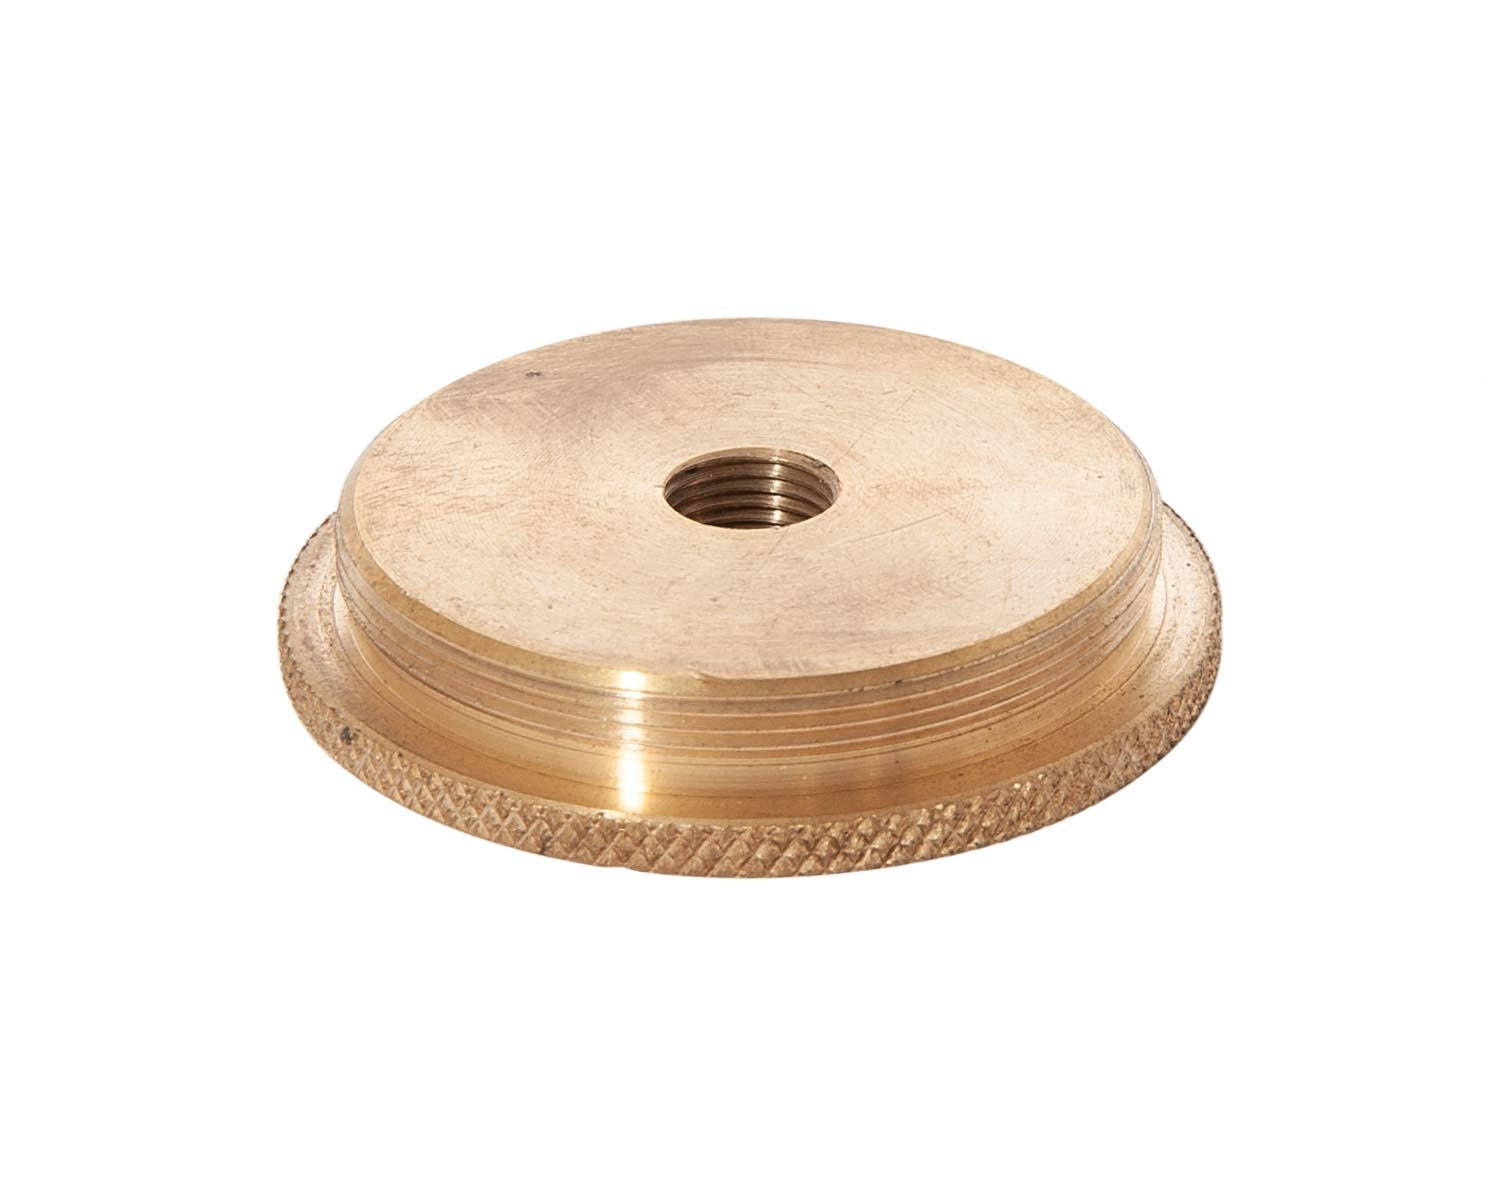 2 Inch Diameter Unfinished Brass Cap For A Cluster Body w/ Center Hole, 1/8F